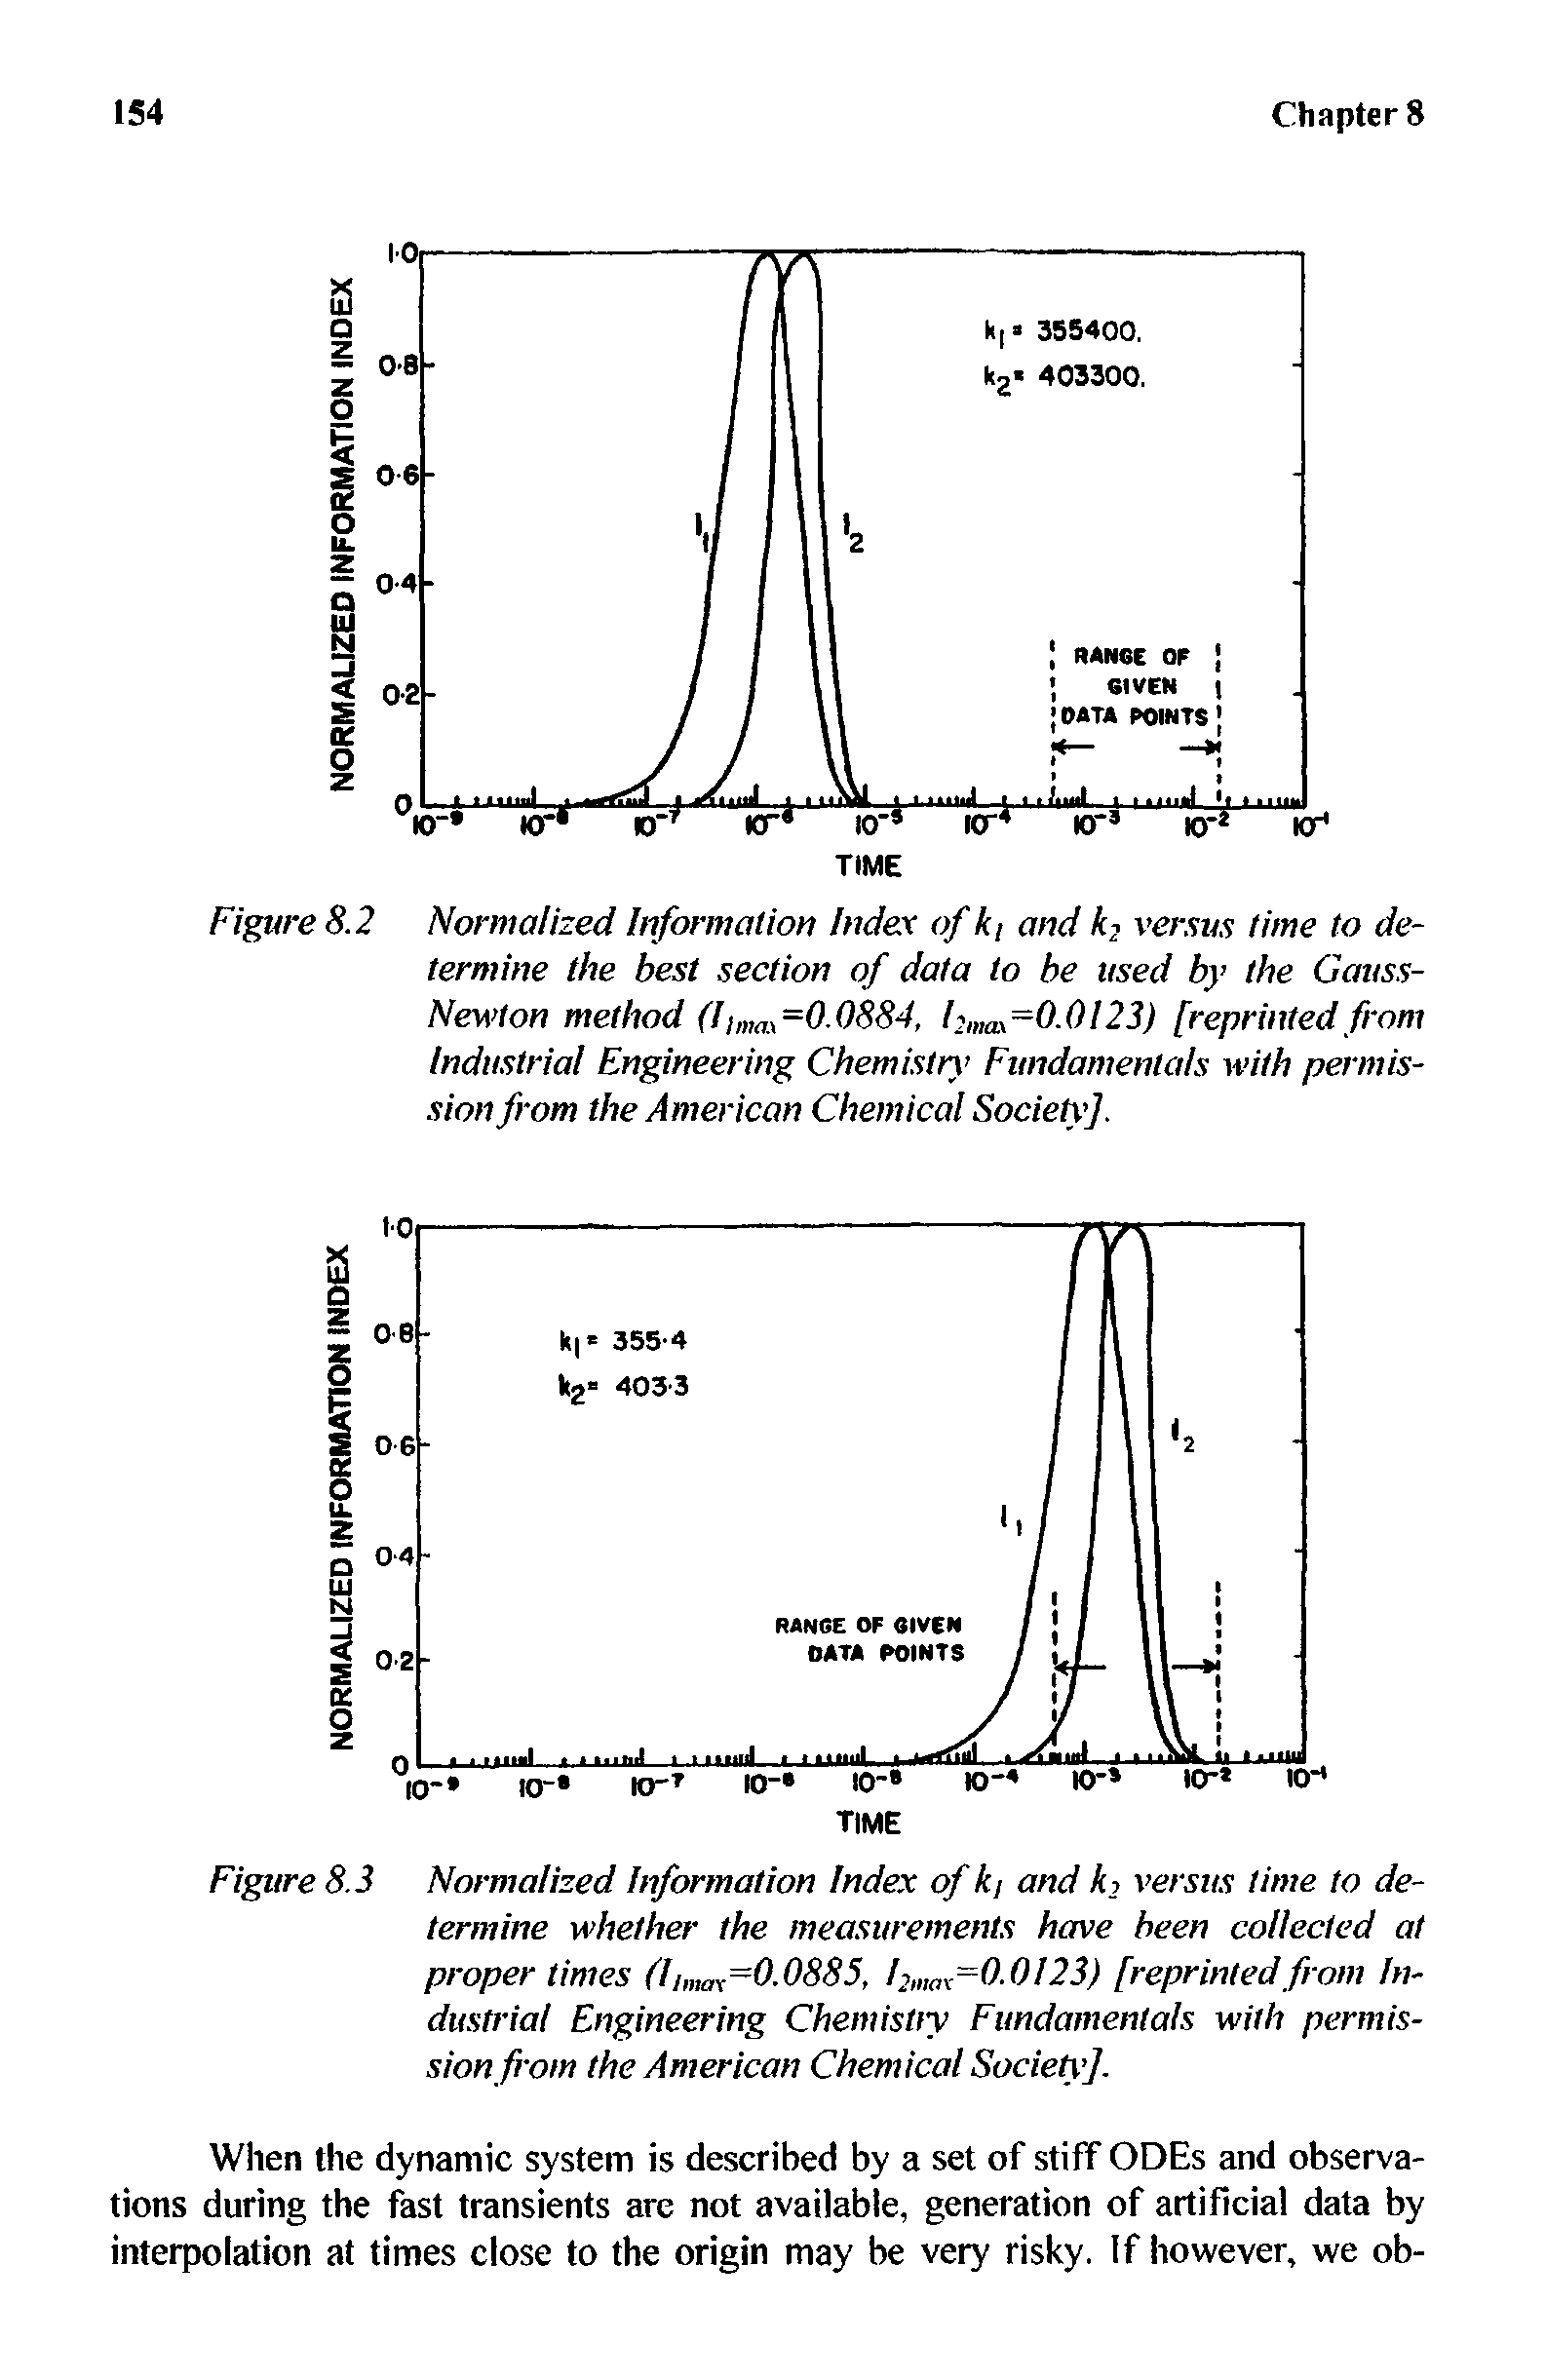 Figure 8.3 Normalized Information Index of kj and k2 versus time to determine whether the measurements have been collected at proper times (Ilmax=0.0885, I2max=0.0l23) [reprintedfrom Industrial Engineering Chemistry Fundamentals with permission from the American Chemical Society].